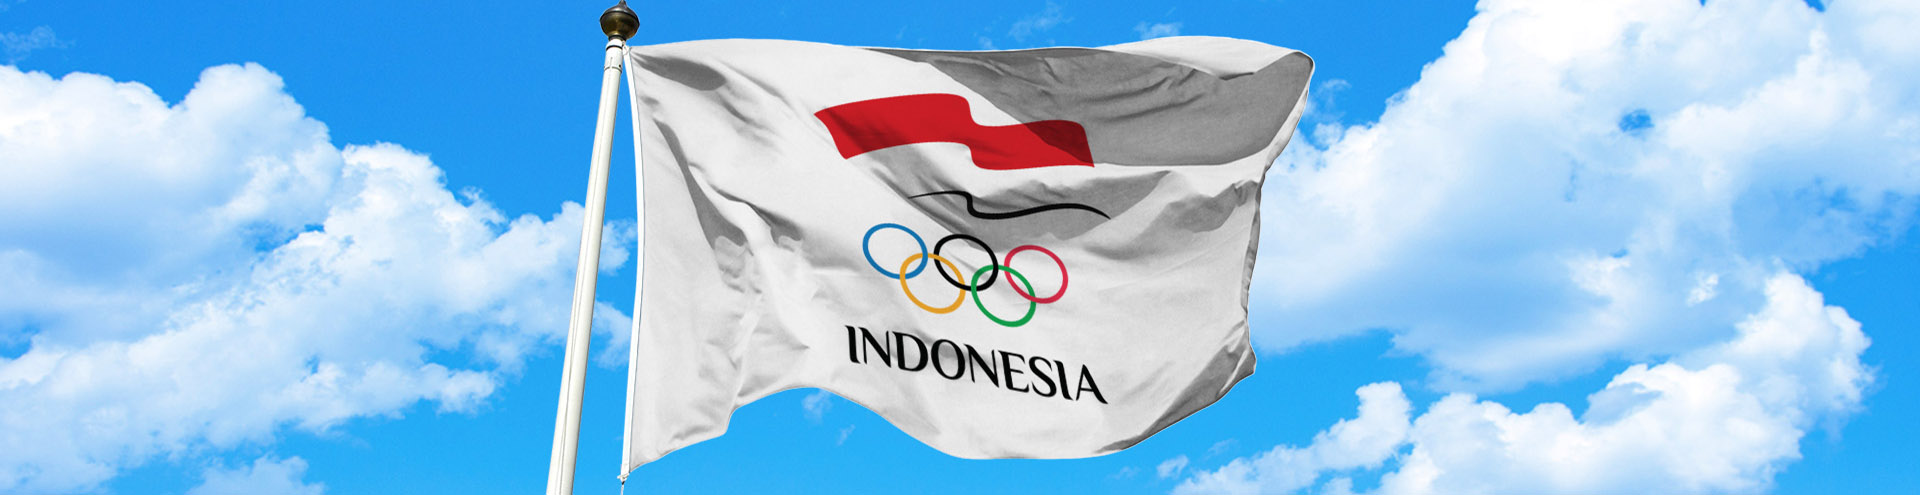 KOI Understands OCA Decision to Postpone Events - Indonesia Olympic Commitee